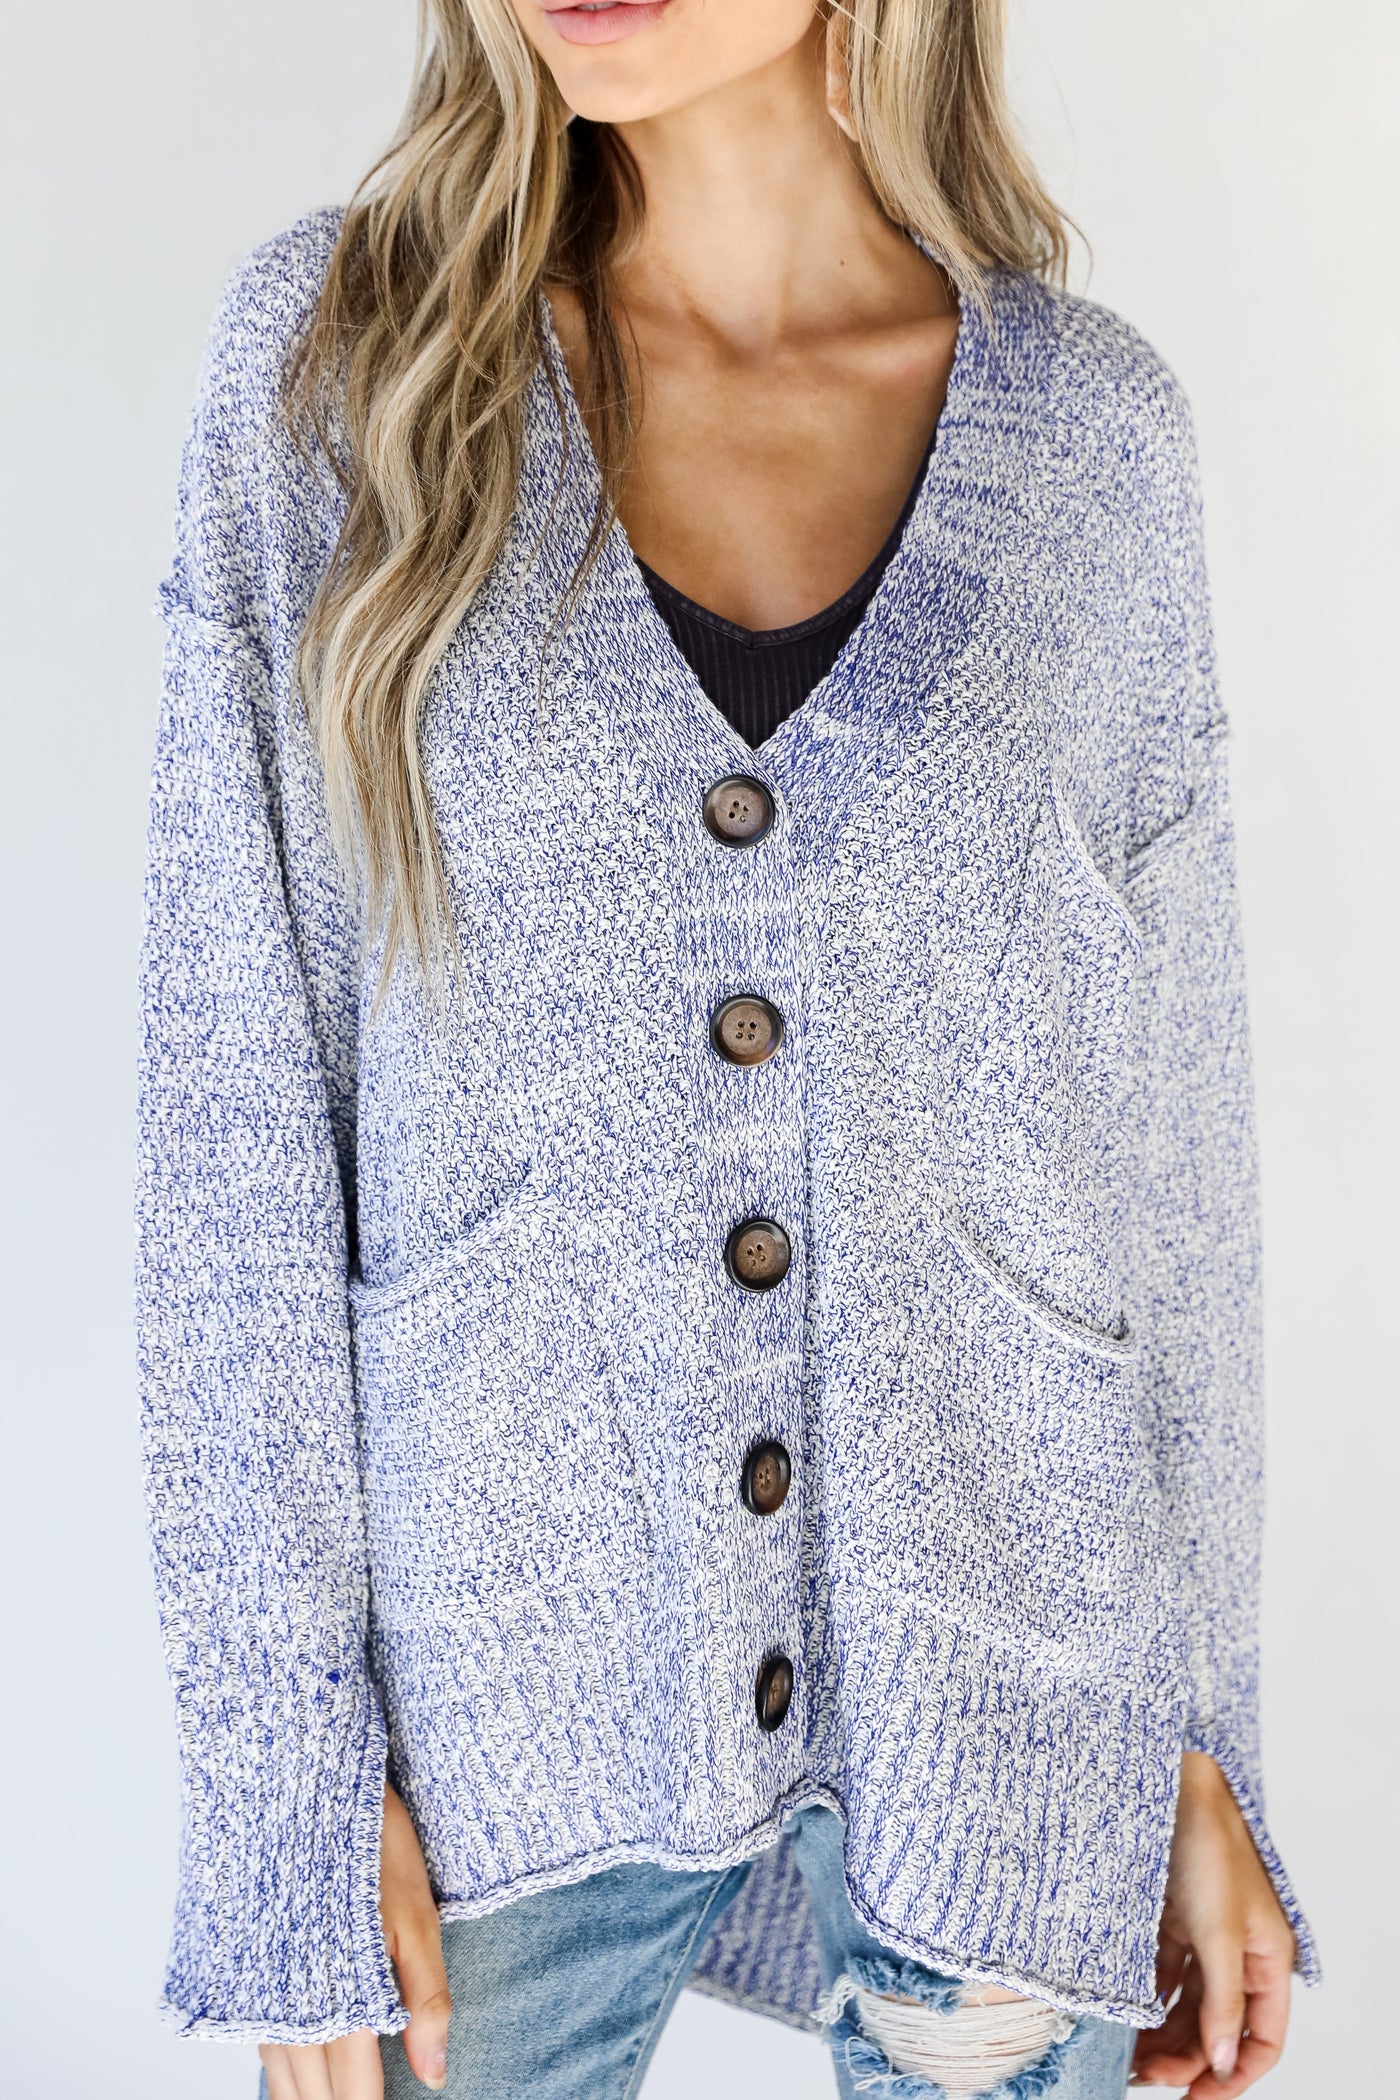 Sweater Cardigan in blue front view